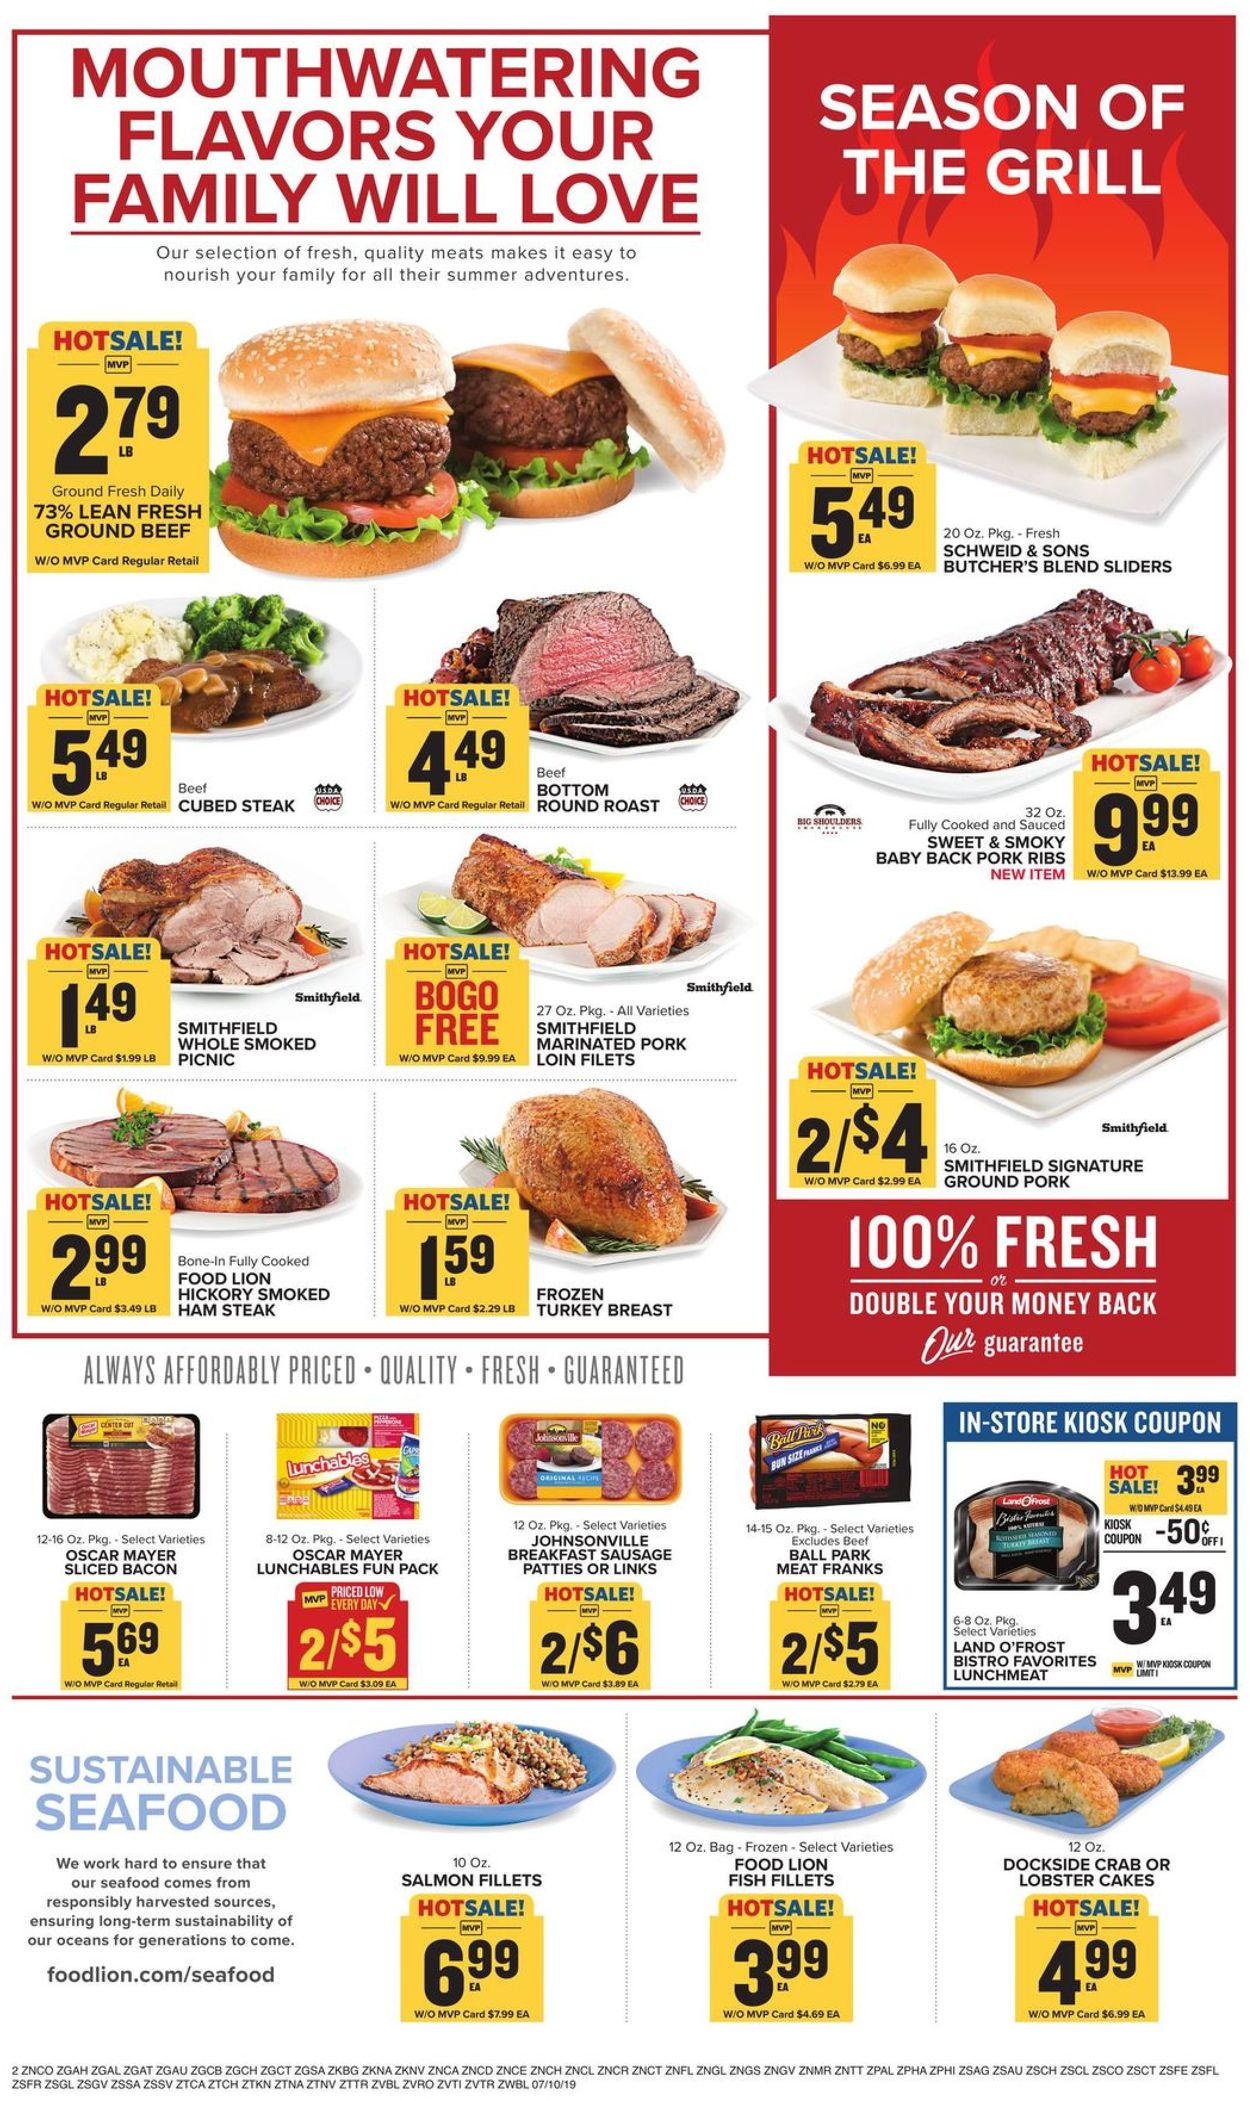 Food Lion Current weekly ad 07/10 - 07/16/2019 [3] - frequent-ads.com